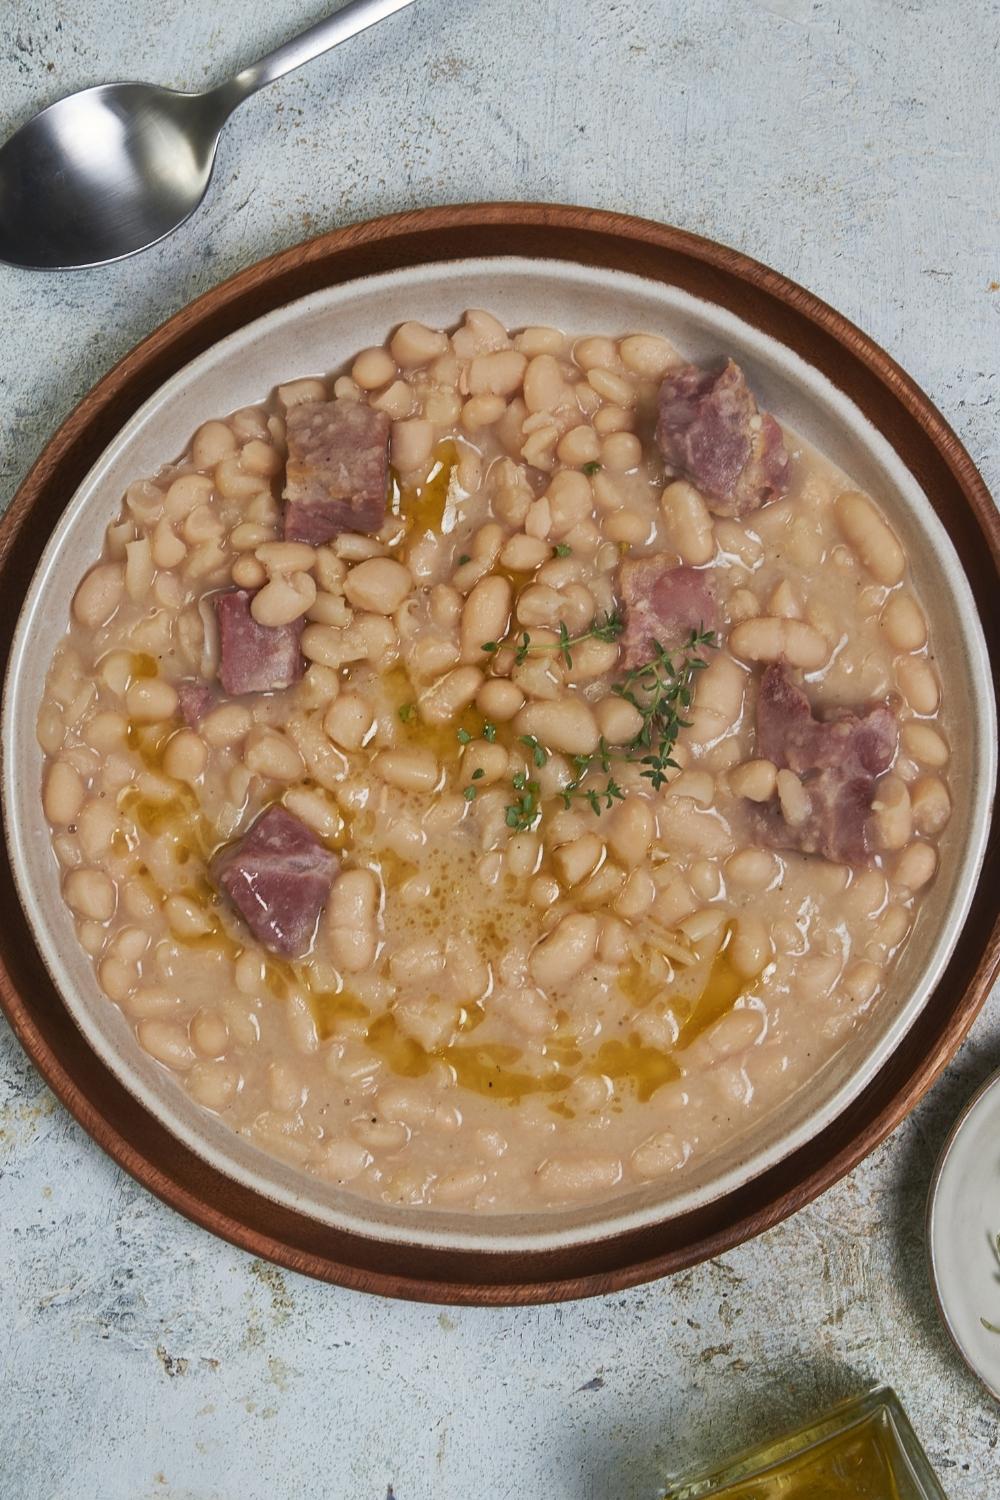 A big bowl of great northern beans with ham served on a wooden plate tray.